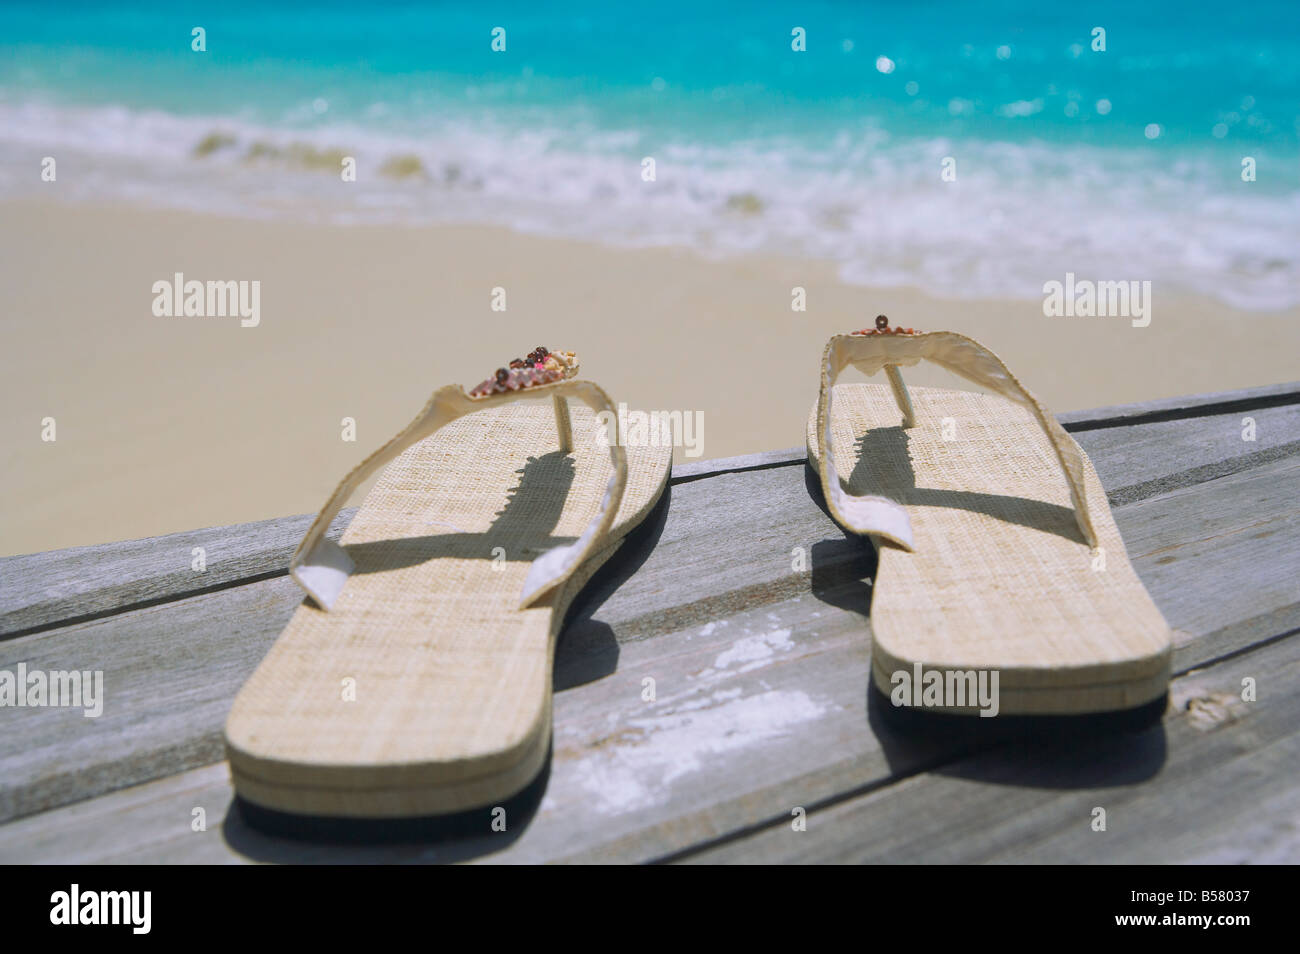 Pair of slippers on deck on beach Stock Photo